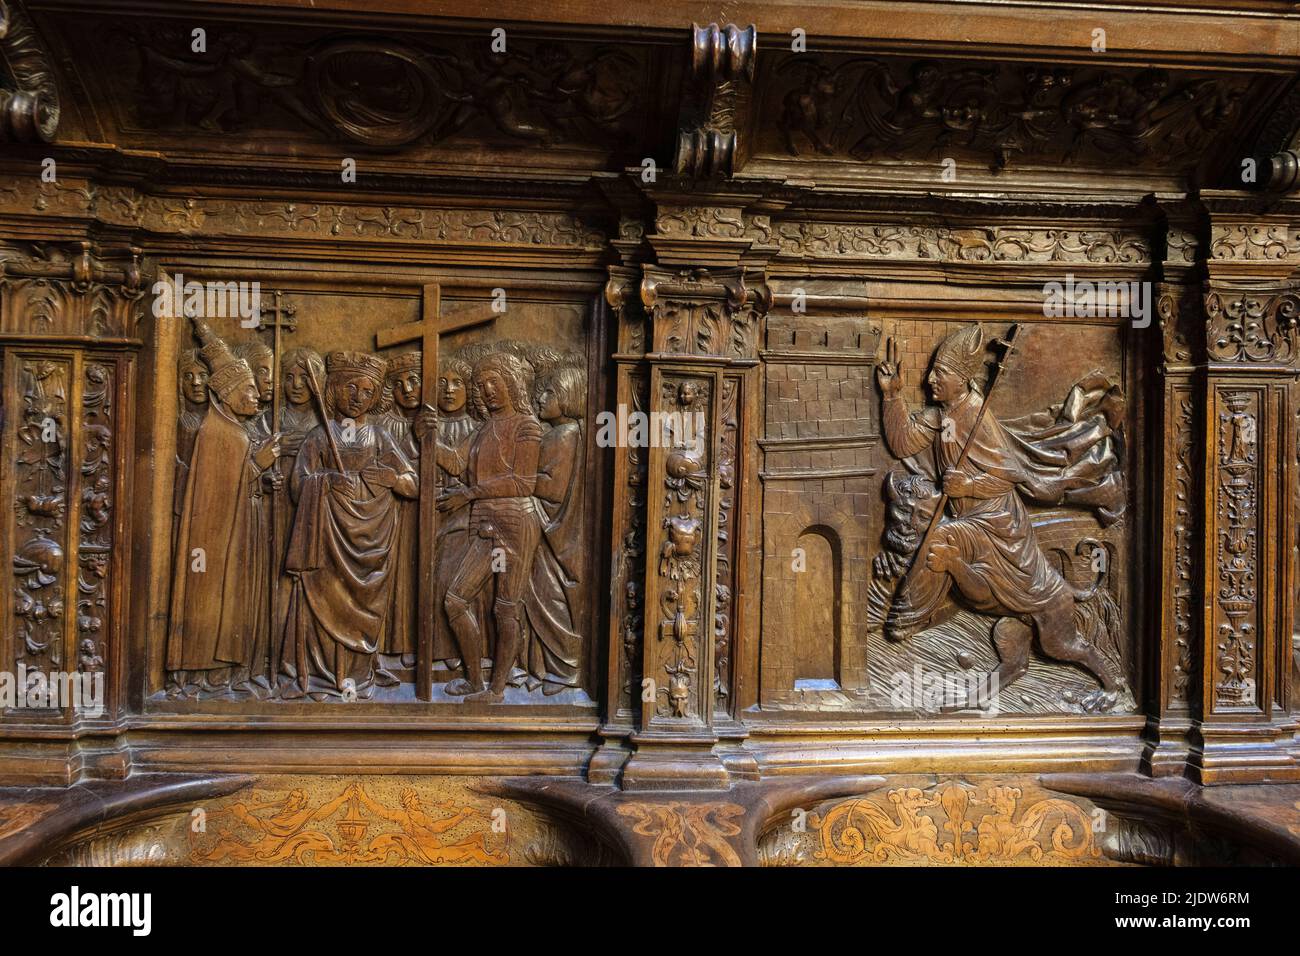 Spain, Burgos. Cathedral of Santa Maria, a World Heritage Site. Carvings on the Choir Stalls. Stock Photo